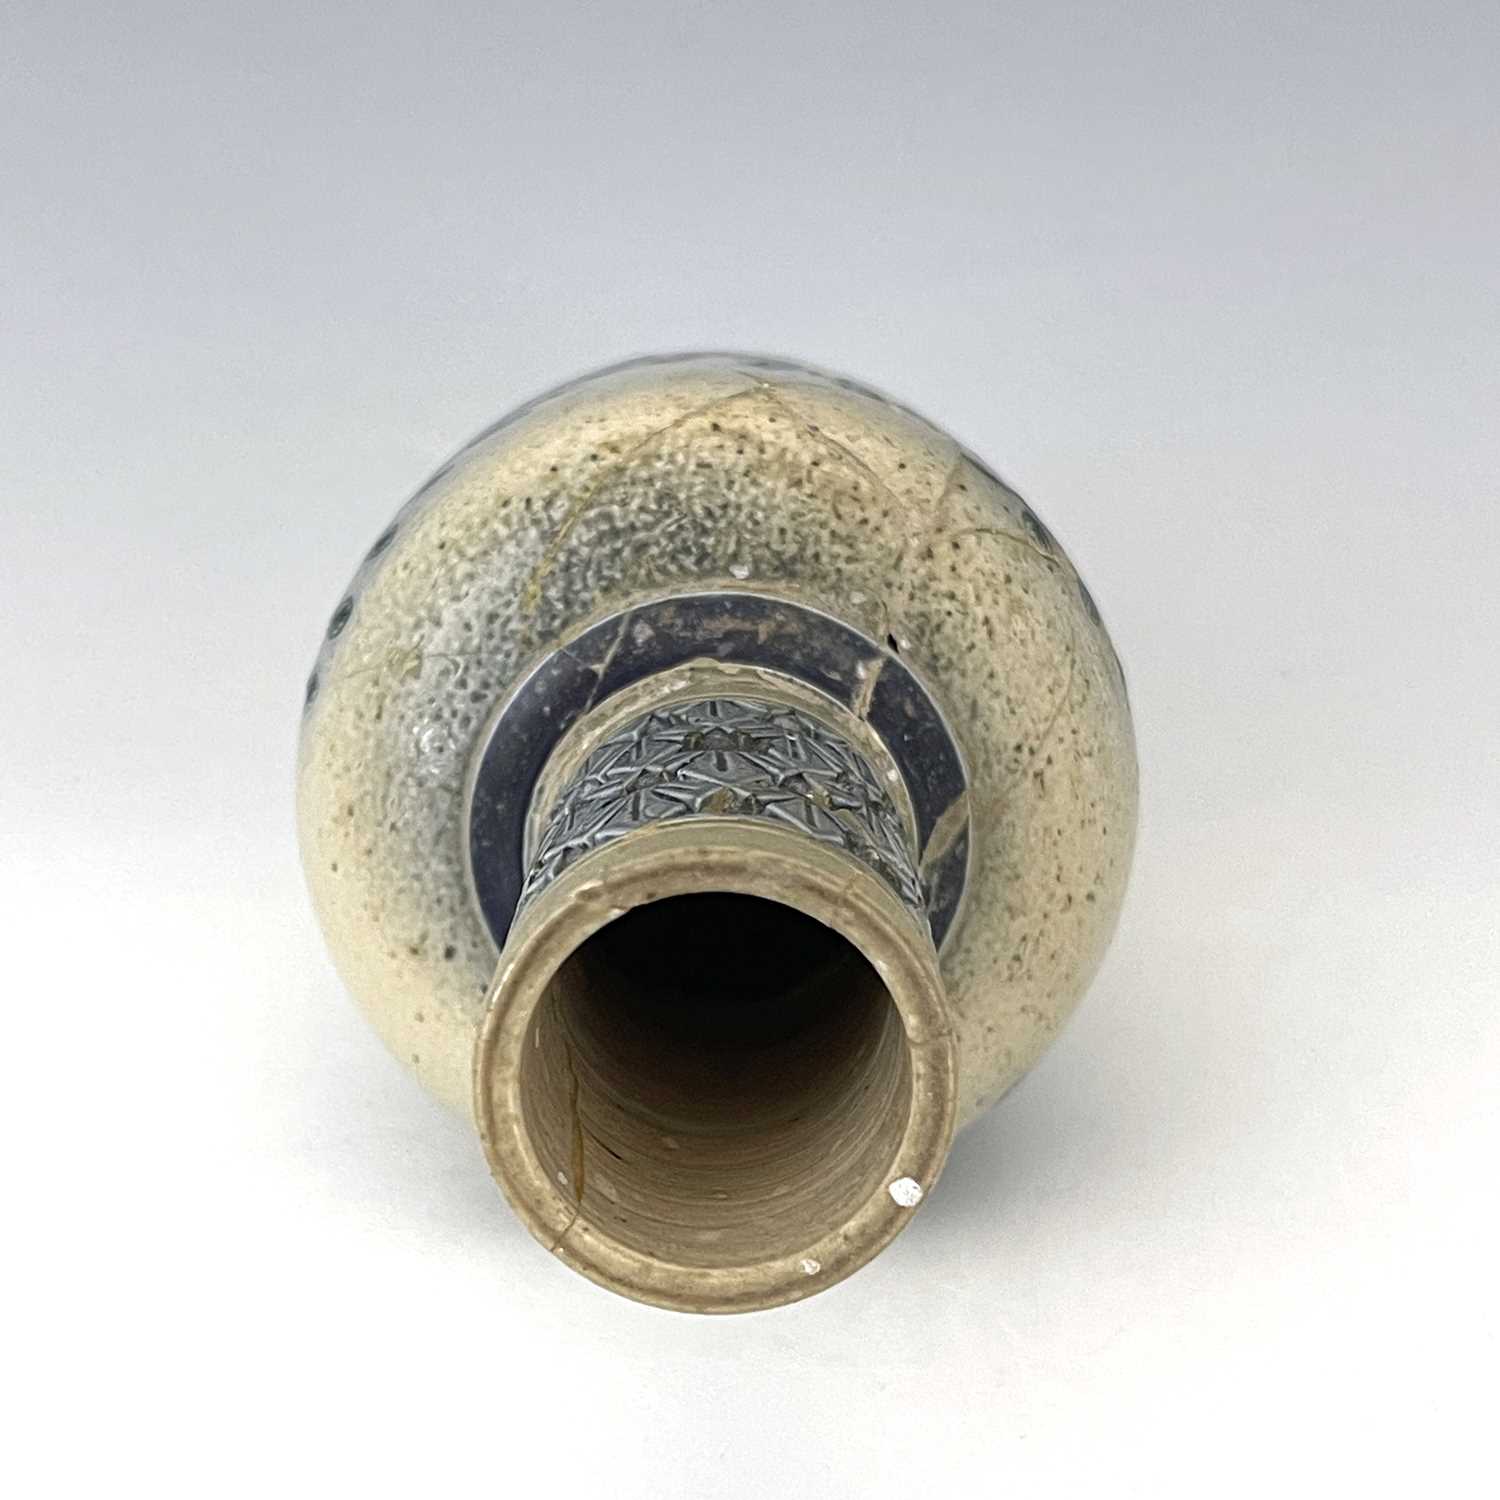 Edwin Martin for Martin Brothers, a stoneware vase, 1879, shouldered and footed form with - Image 3 of 6